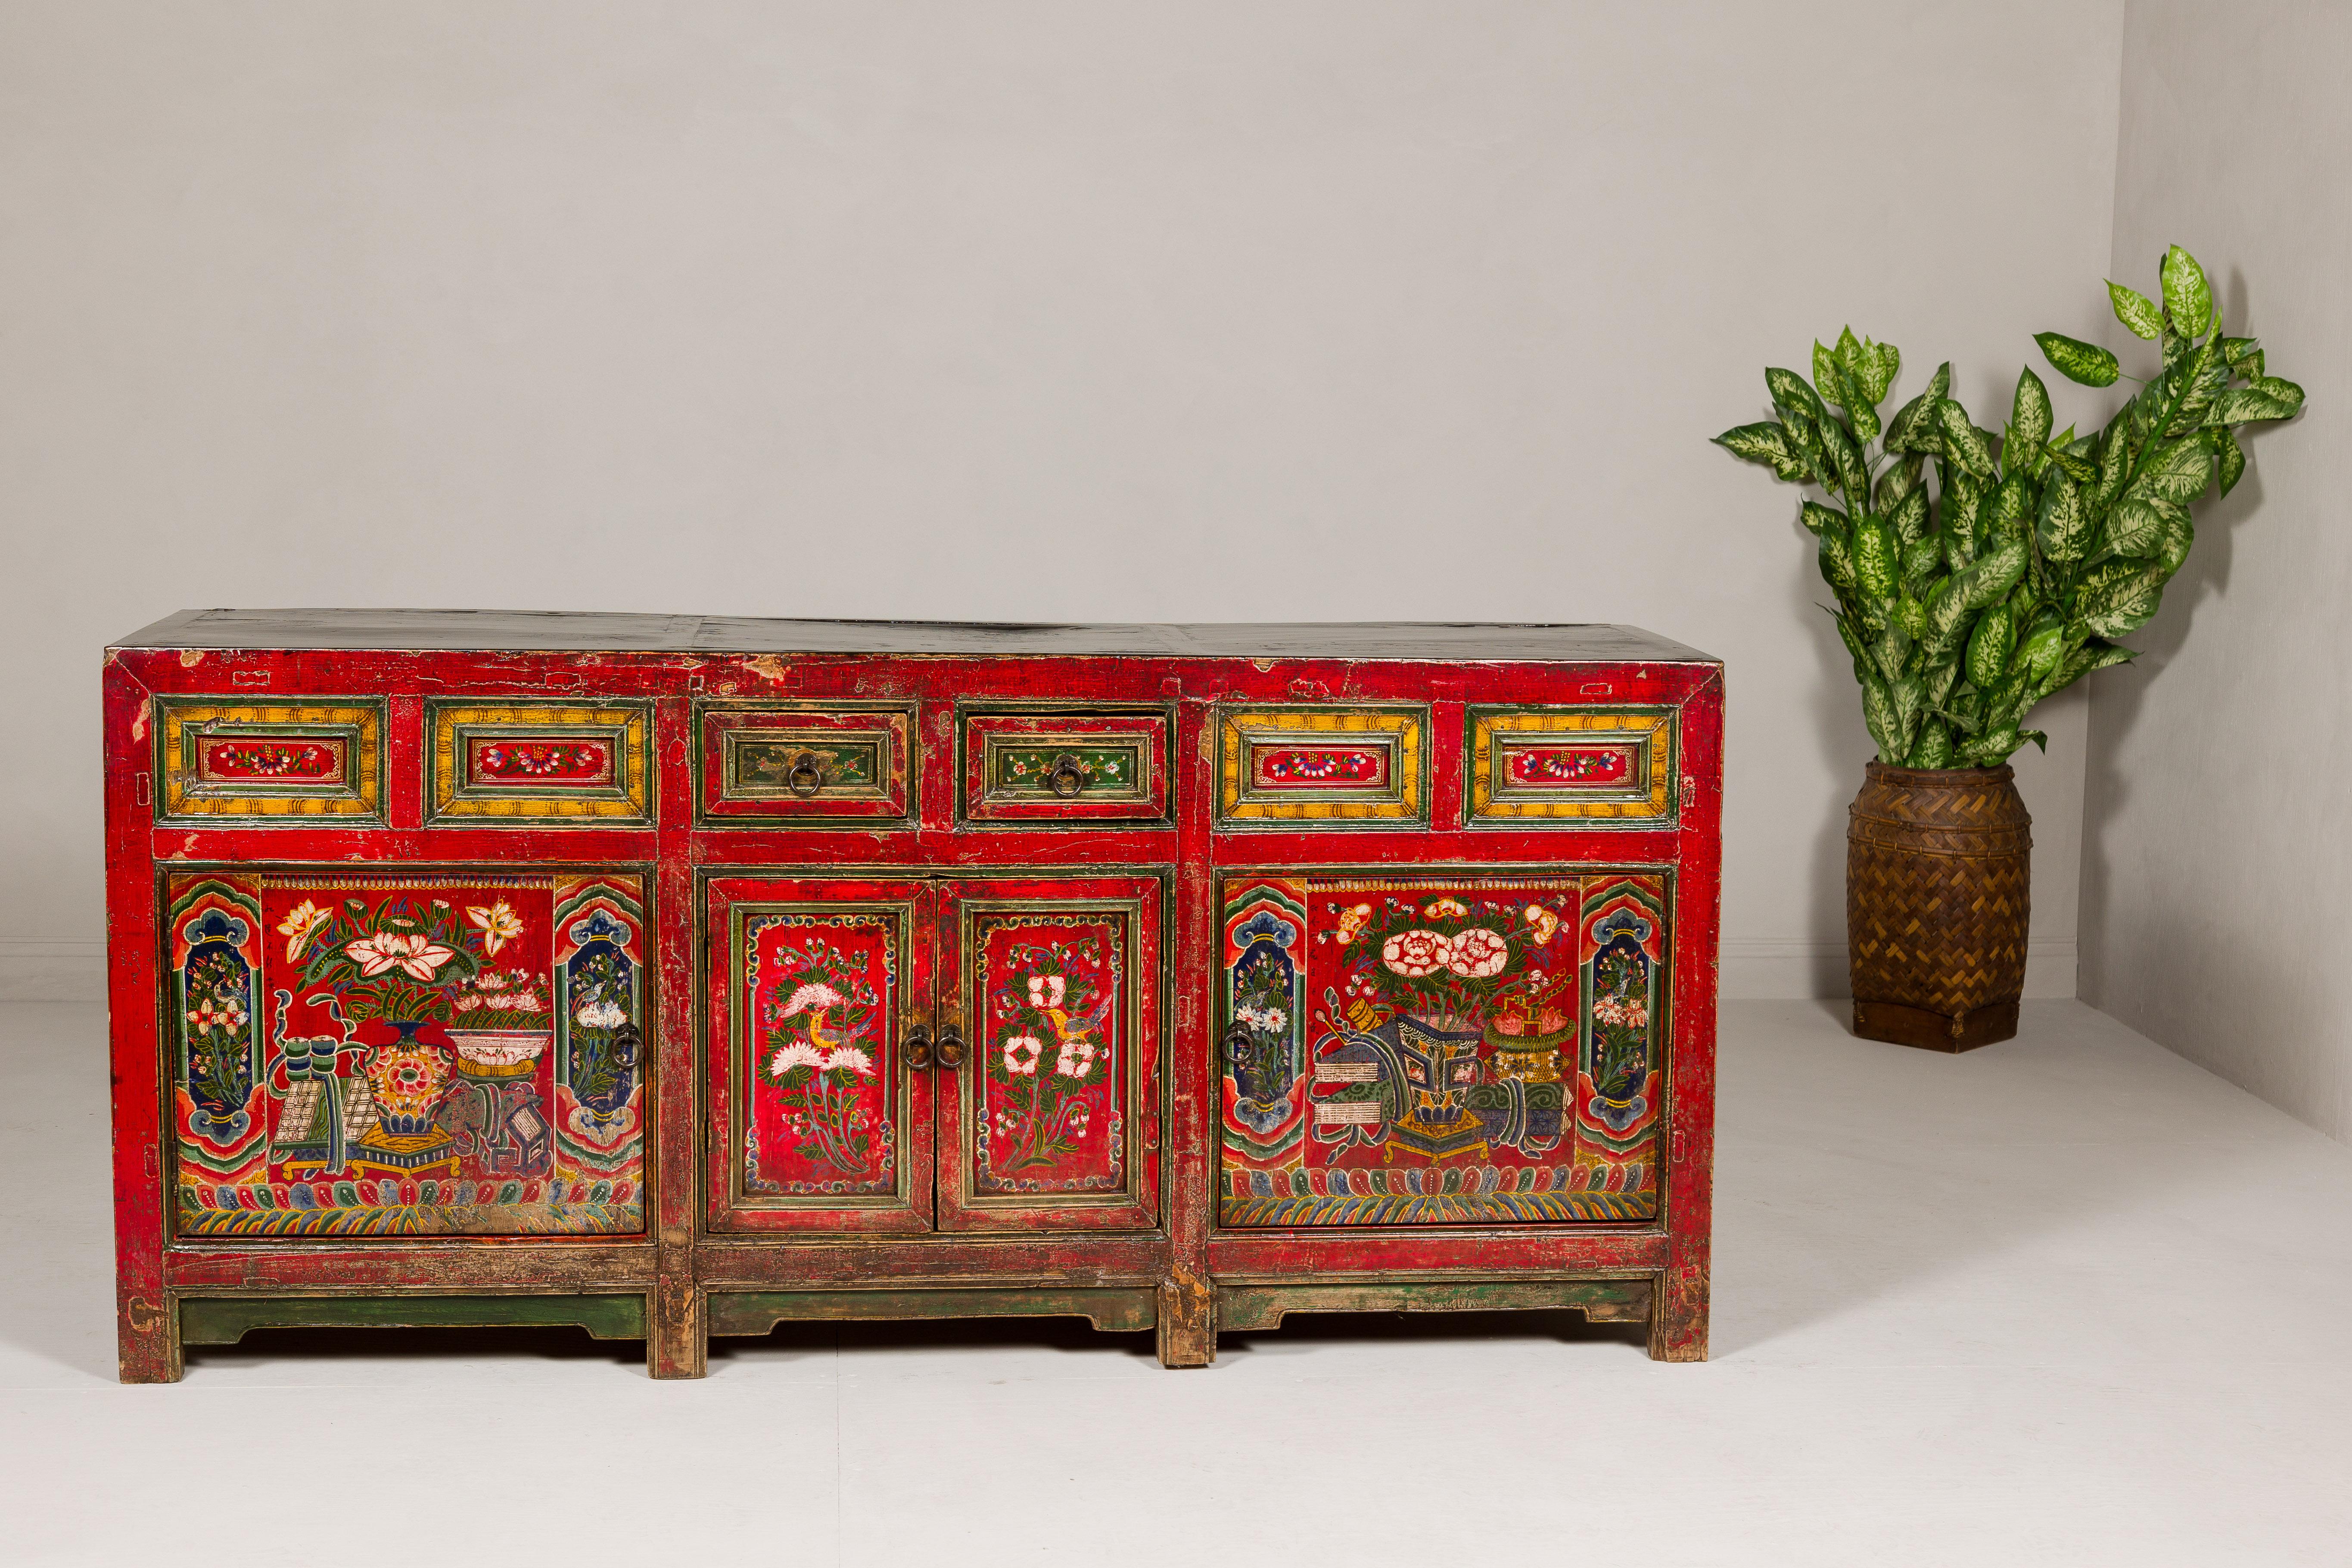 Lacquered 19th Century Mongolian Polychrome Sideboard with Doors, Drawers and Floral Décor